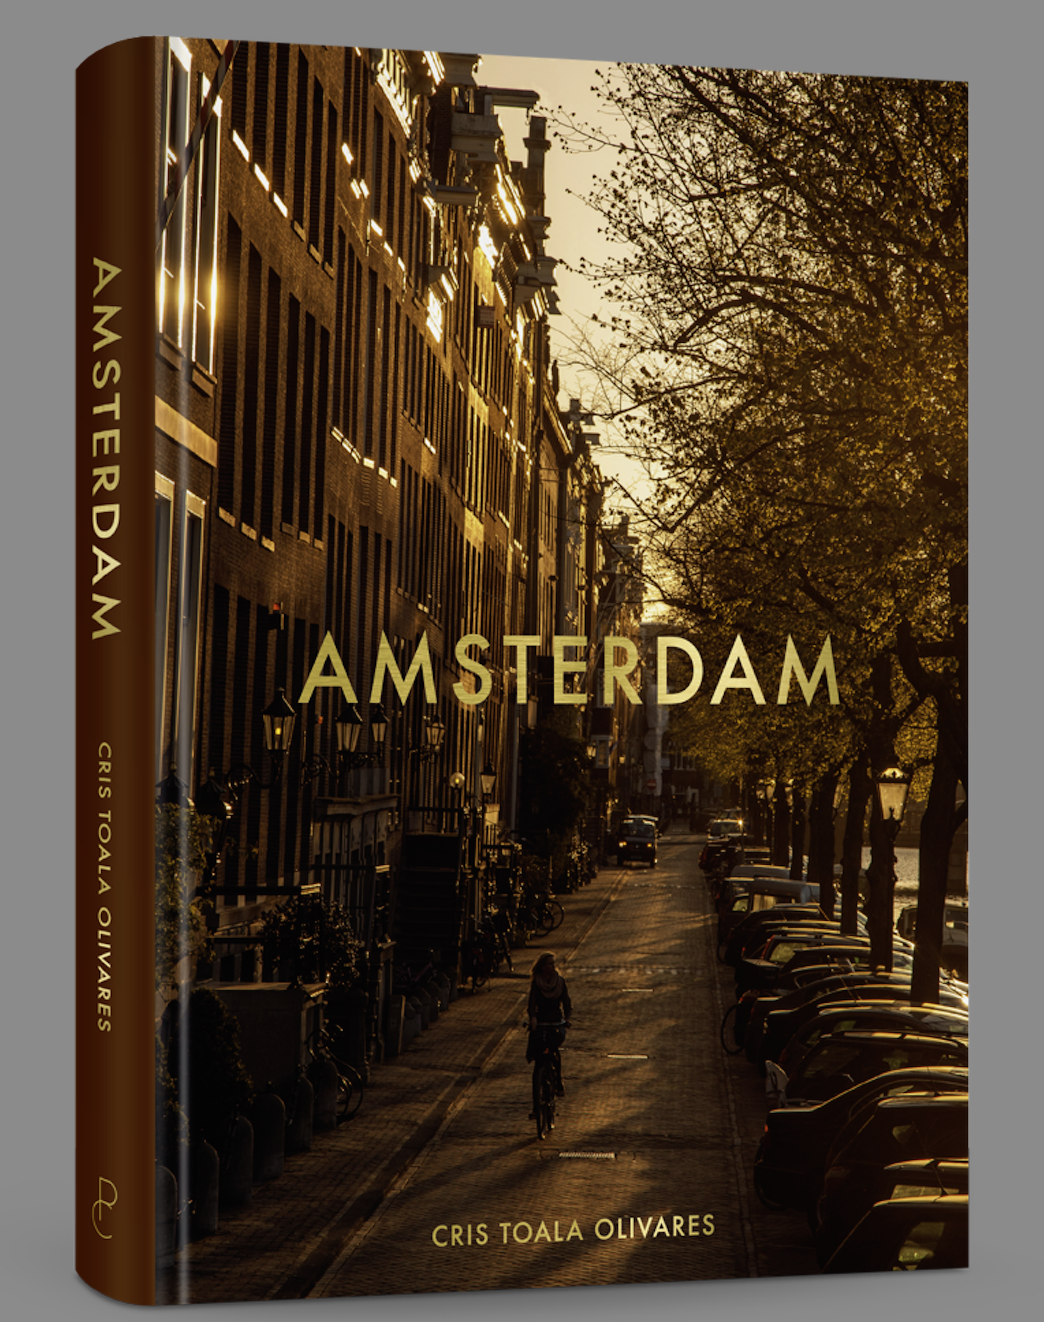 750 Years of Amsterdam | Book Launch